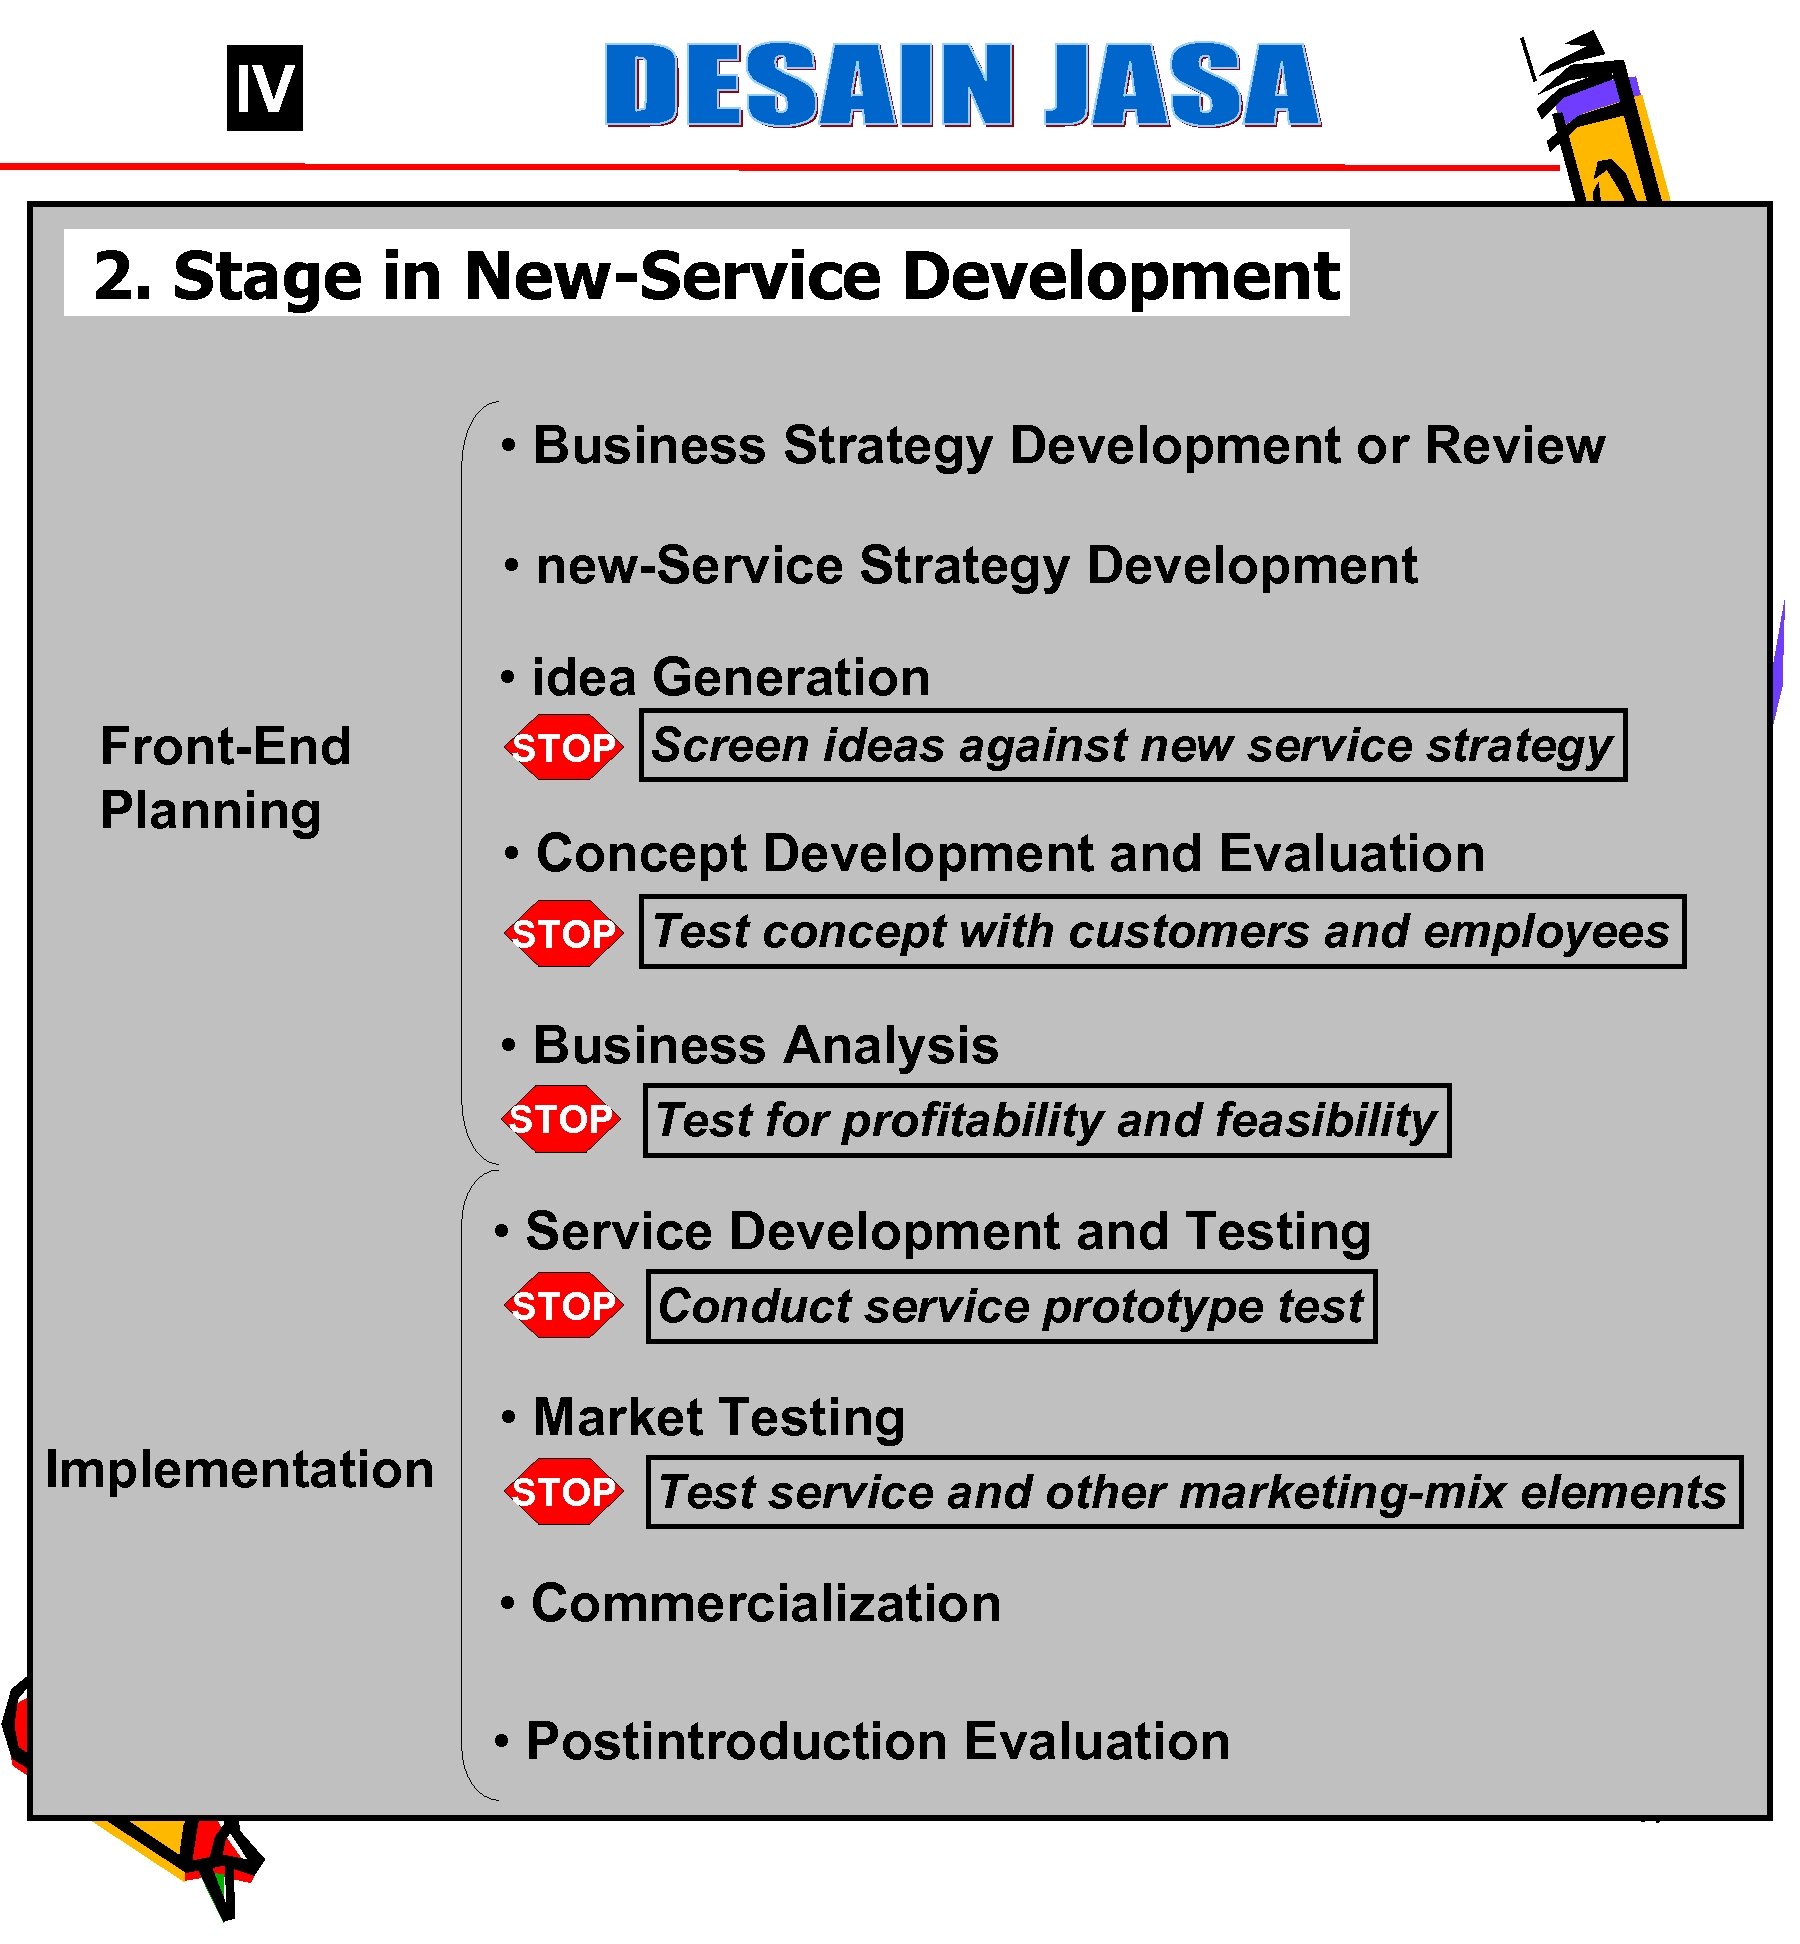 IV 2. Stage in New-Service Development • Business Strategy Development or Review • new-Service